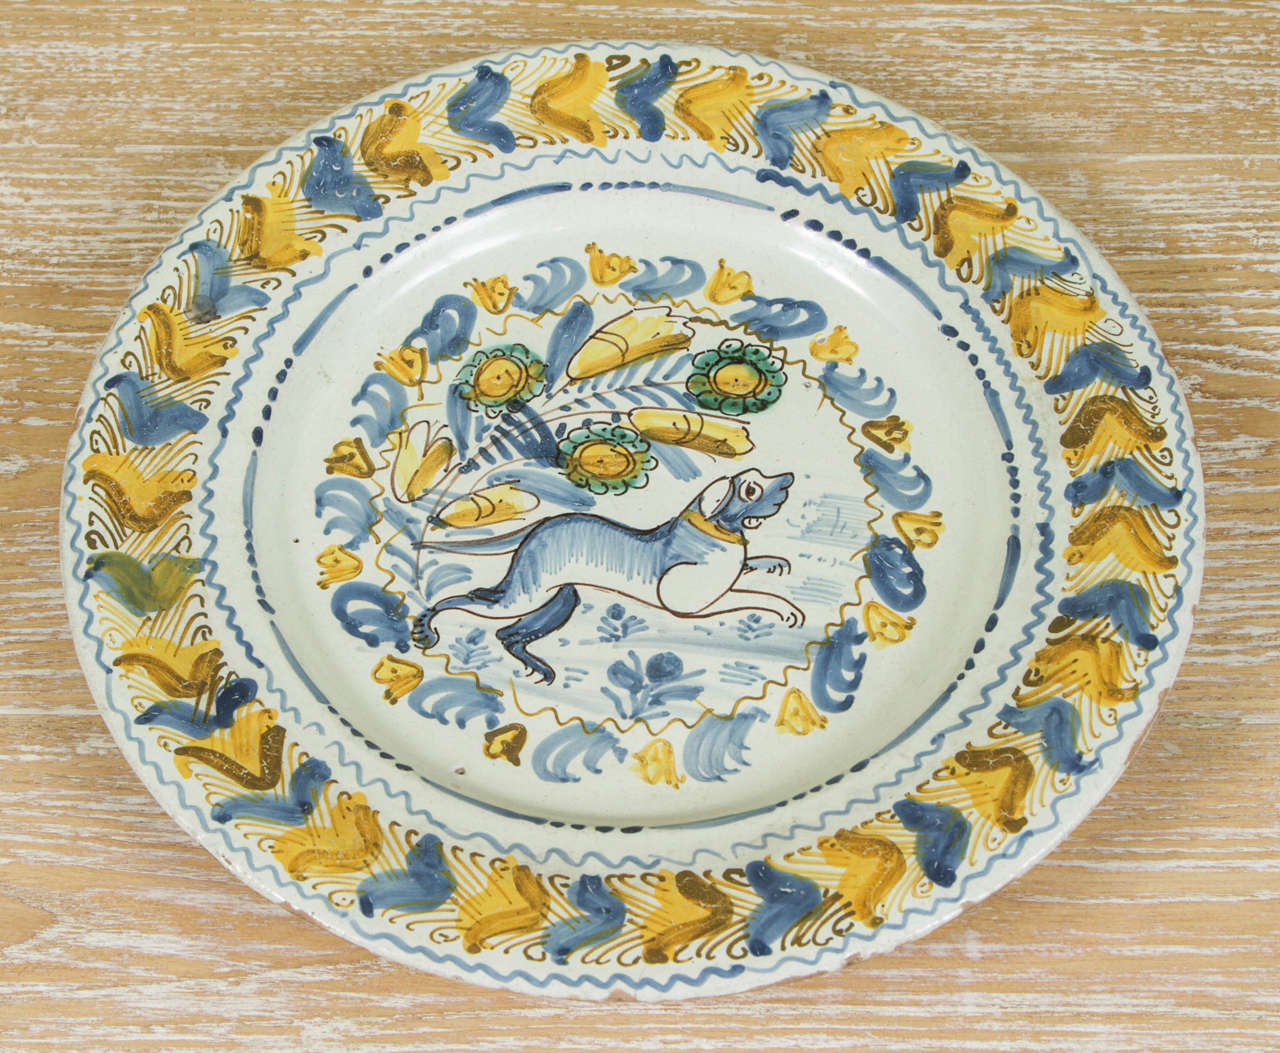 A Spanish Polychrome Faience Charger with a charming Dog Motif, c. 1820